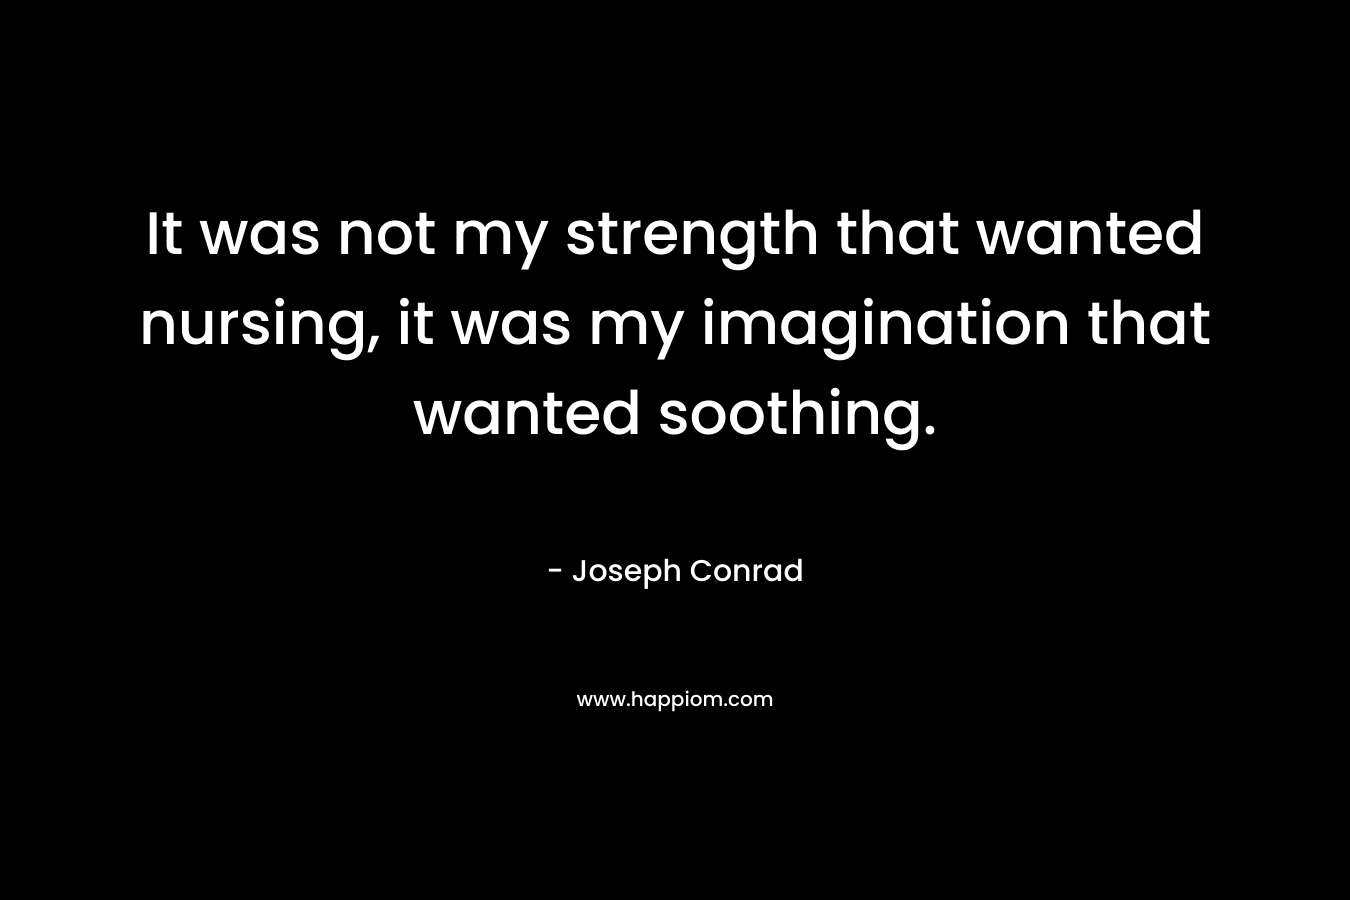 It was not my strength that wanted nursing, it was my imagination that wanted soothing. – Joseph Conrad